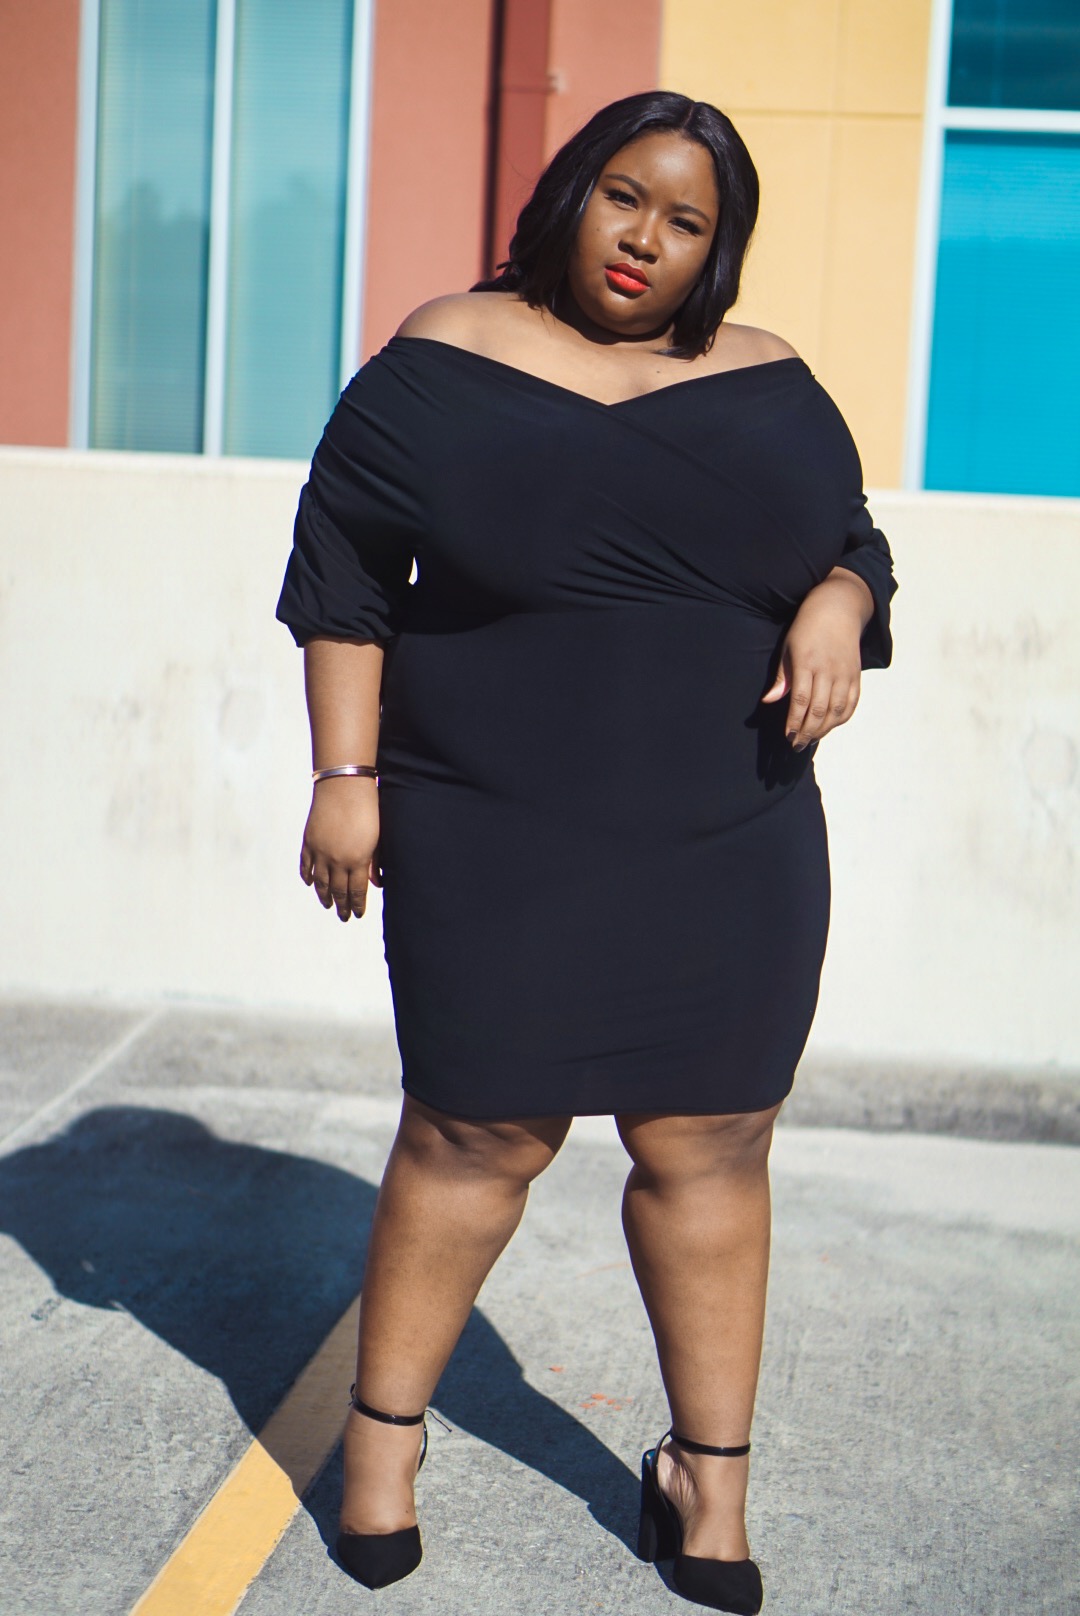 How To Be A Sexy Plus Size Woman From Head To Curve 9449